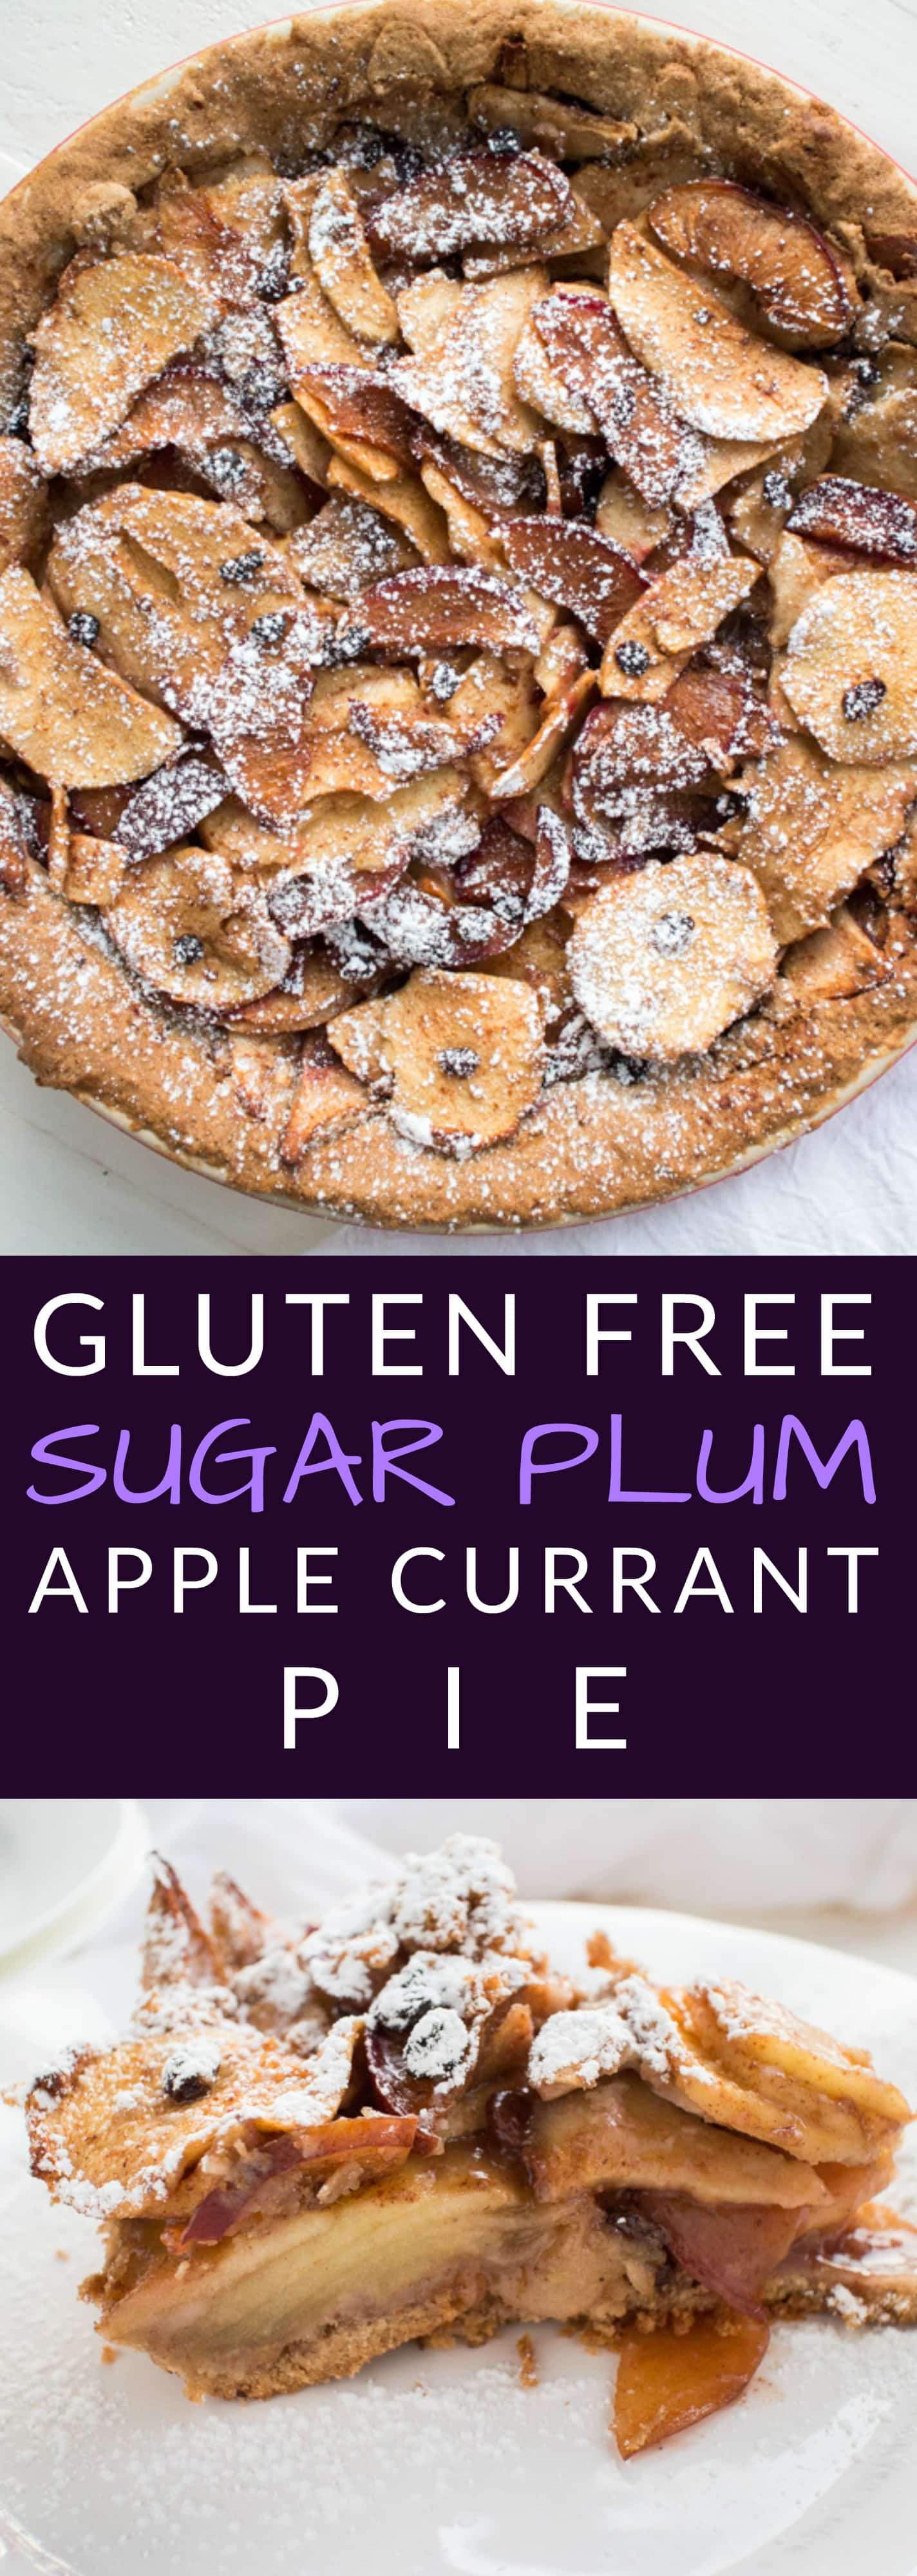 Perfect for CHRISTMAS, GLUTEN FREE Sugar​ ​Plum​ ​Apple​ ​Currant​ ​Pie! This easy to make pie recipe shows you how to make a gluten free pie crust using pecans, brown sugar and gluten free flour. The fruit filling is tossed with sugar and spices to make a delicious pie! This is one of the best pies, perfect for Christmas and Thanksgiving! I can promise you that no one will know that it's GLUTEN FREE! 